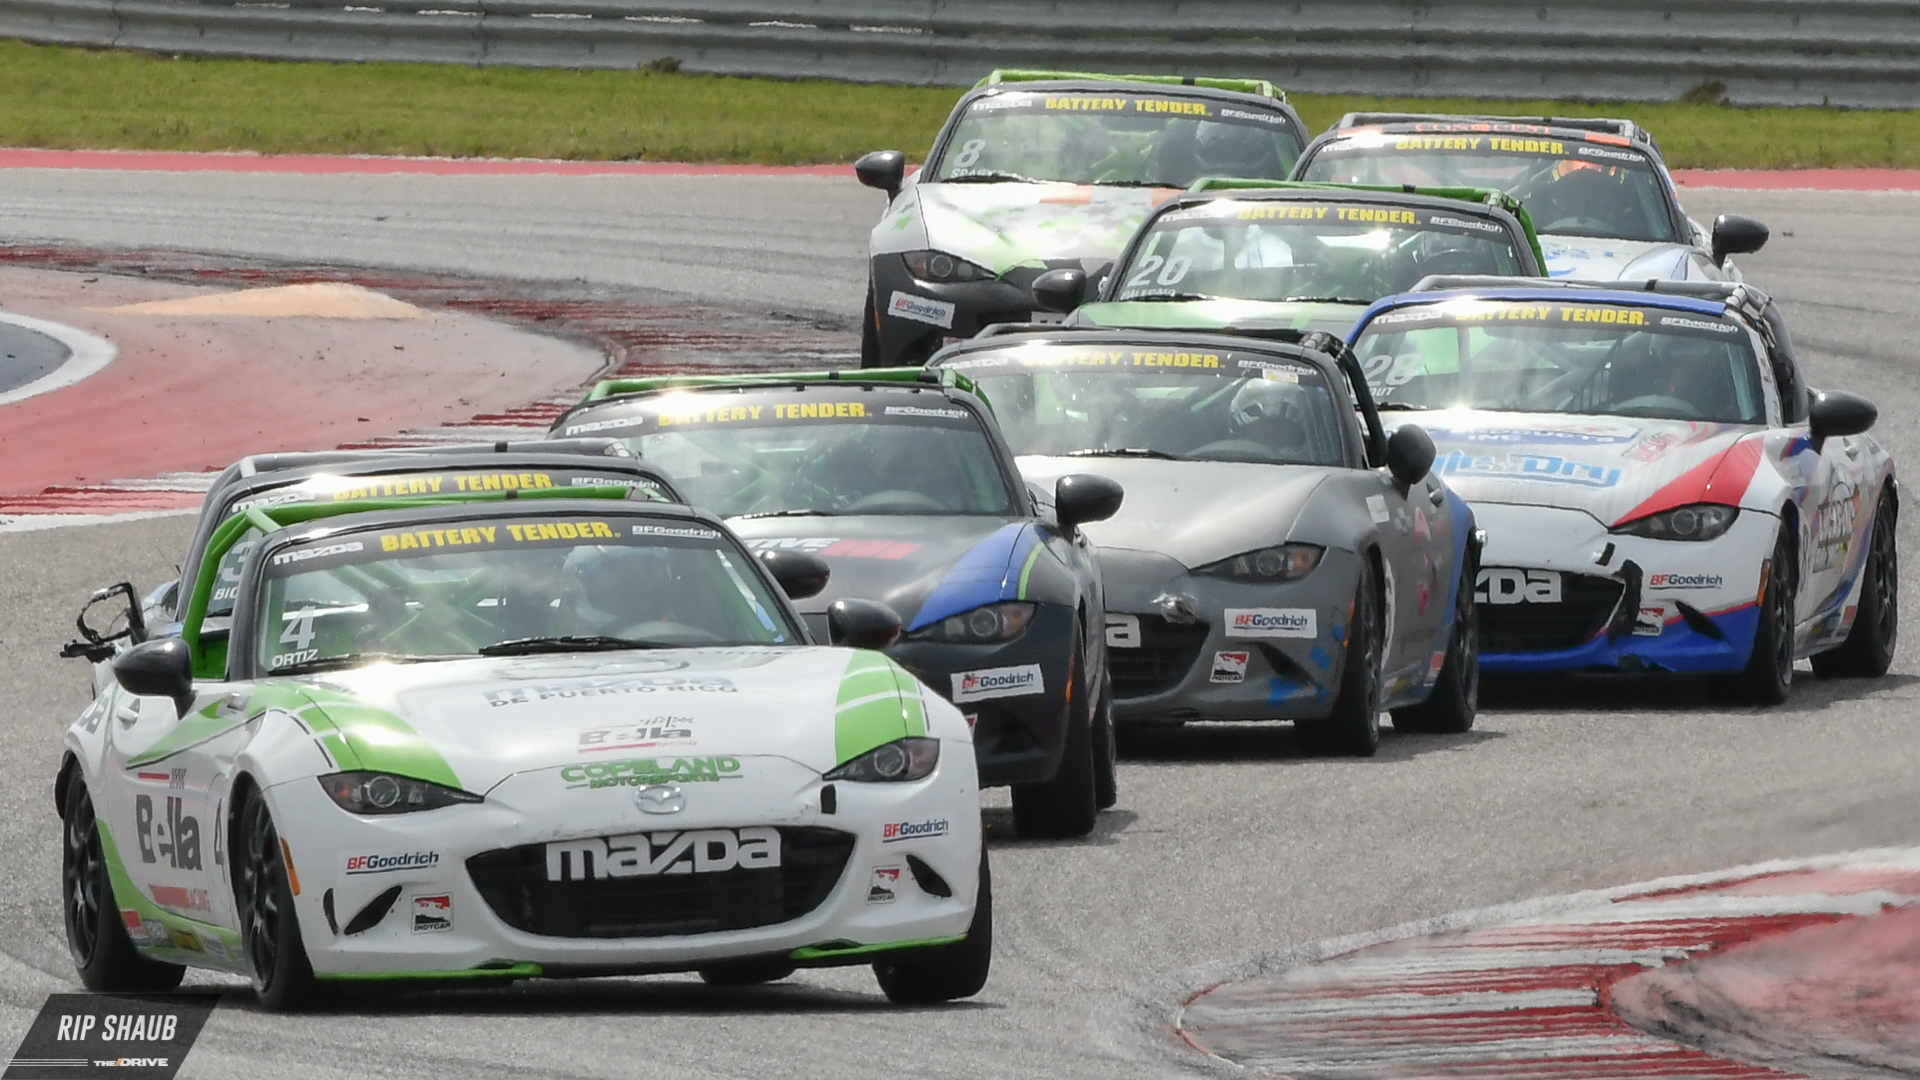 The Mazda MX5 Cup ran two races, and Saturday